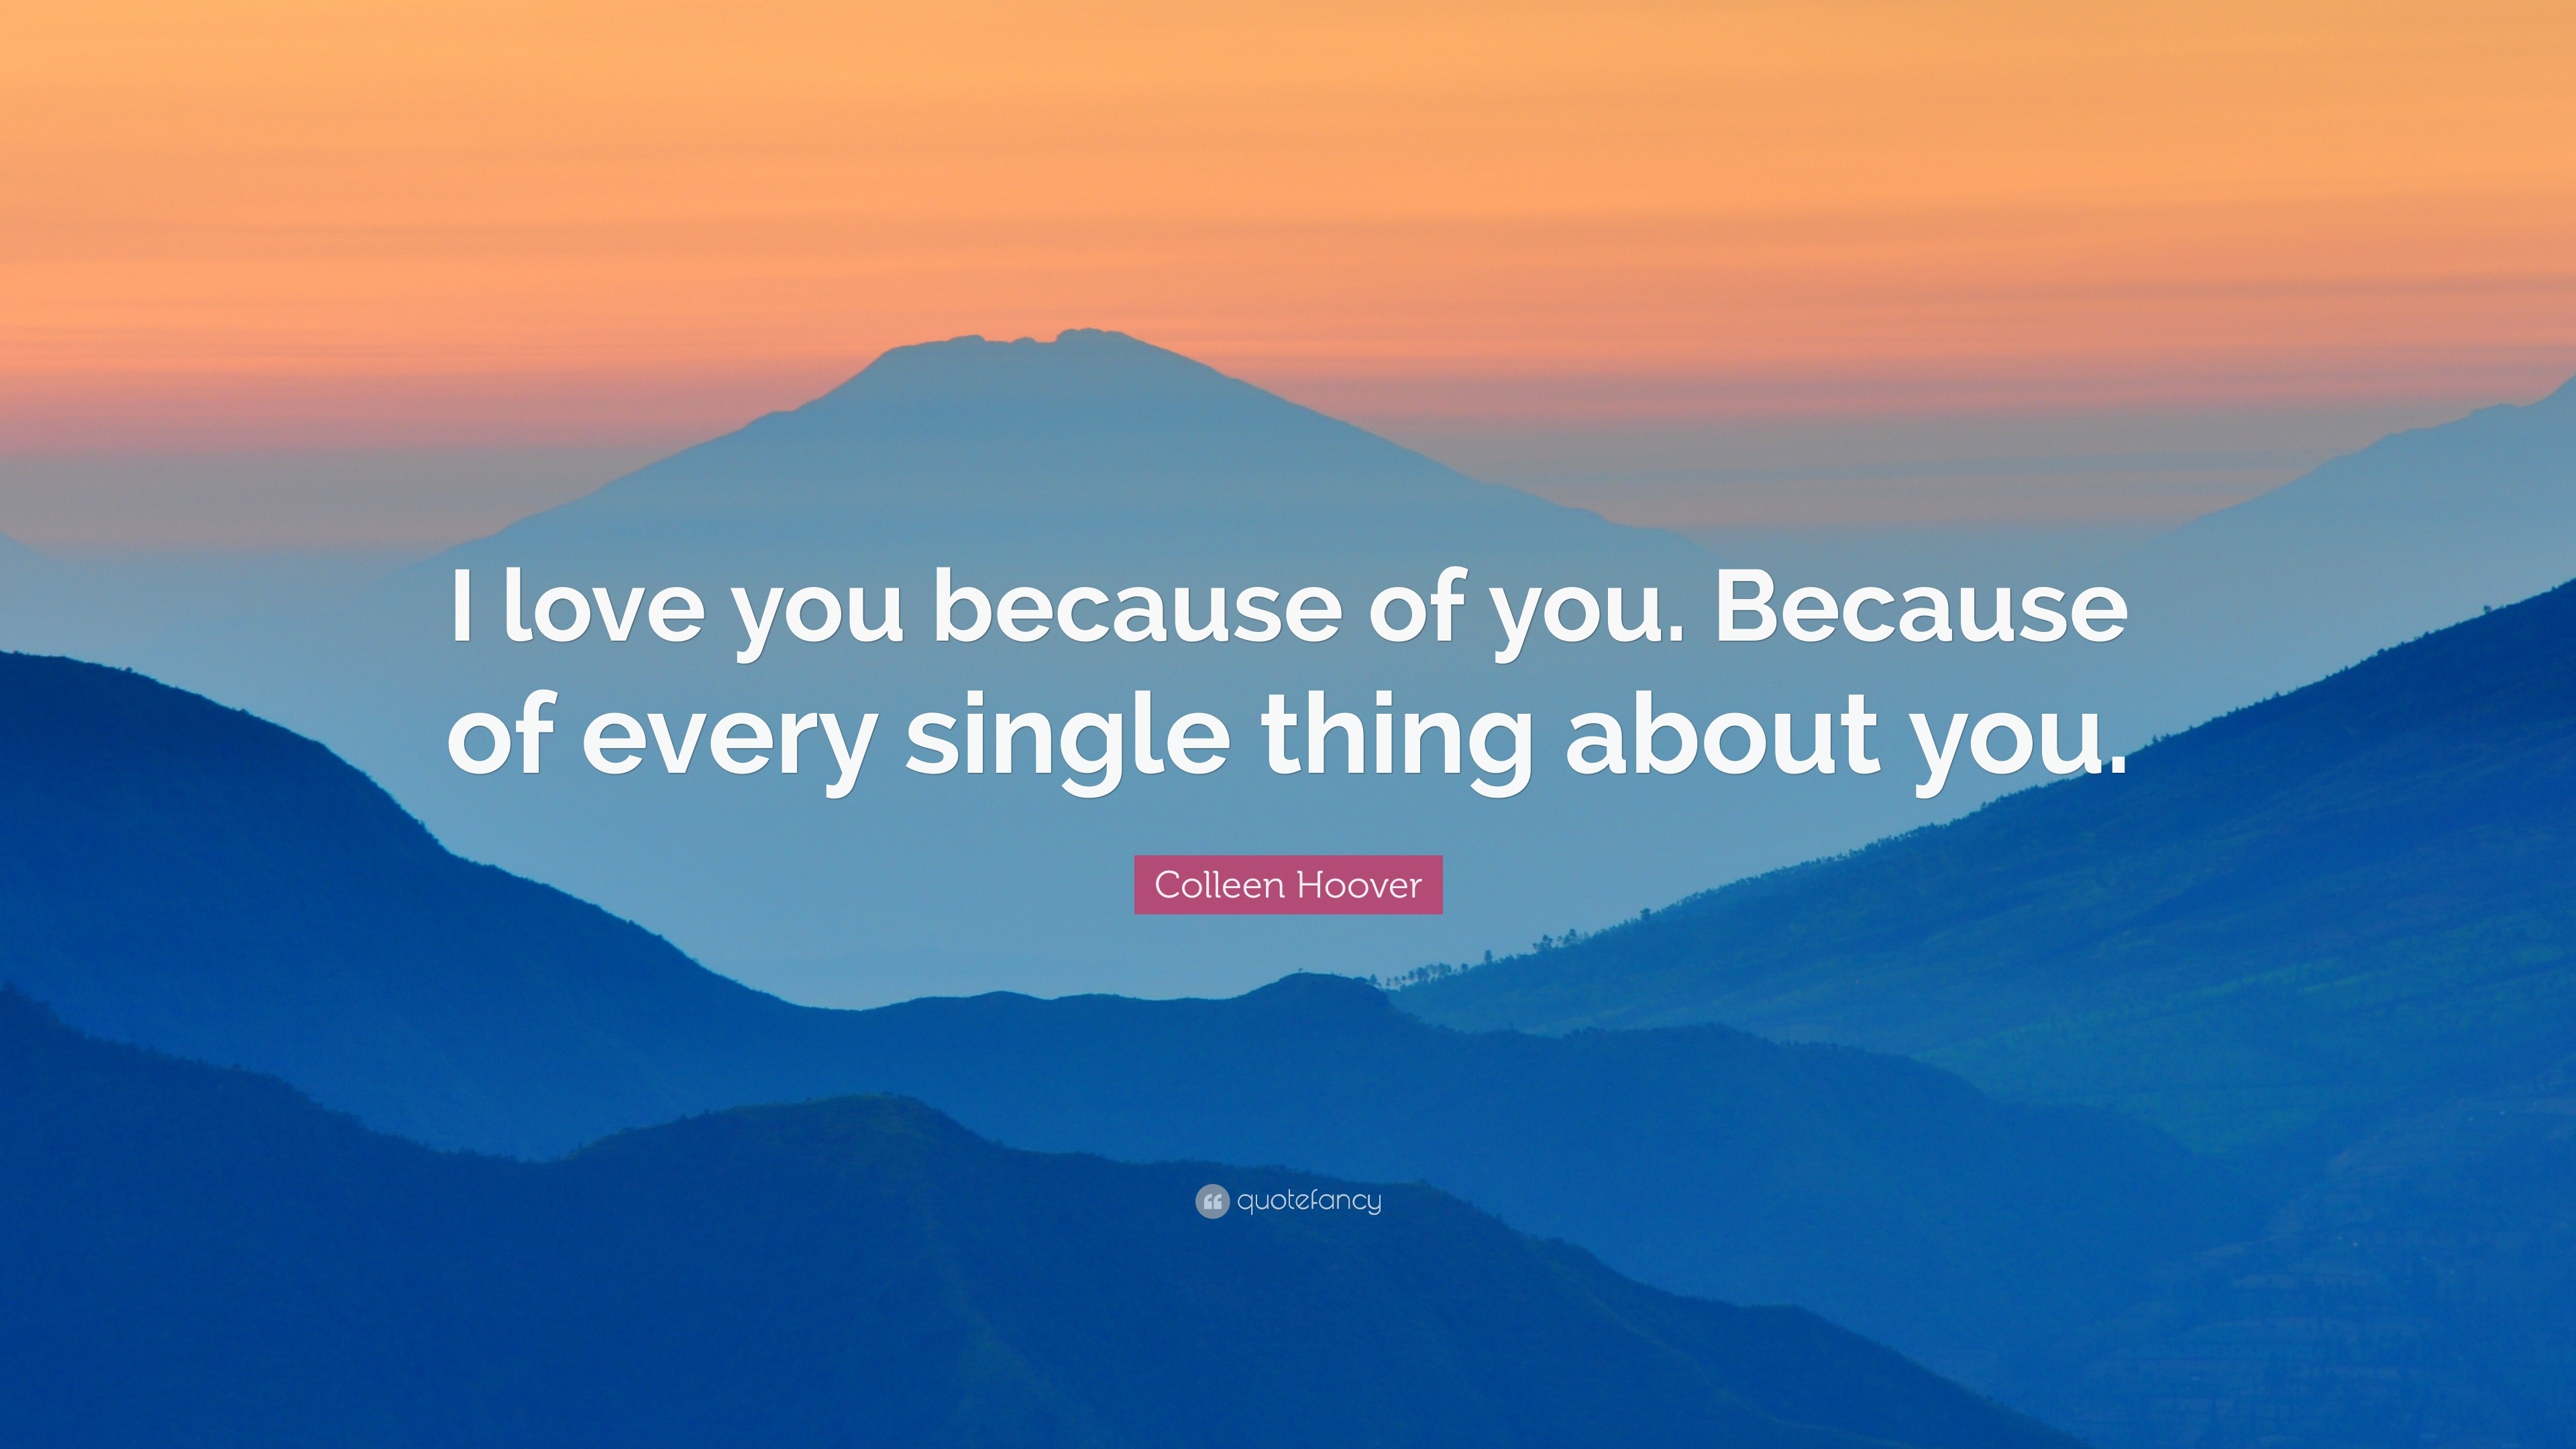 Colleen Hoover Quote: “I love you because of you. Because of every ...